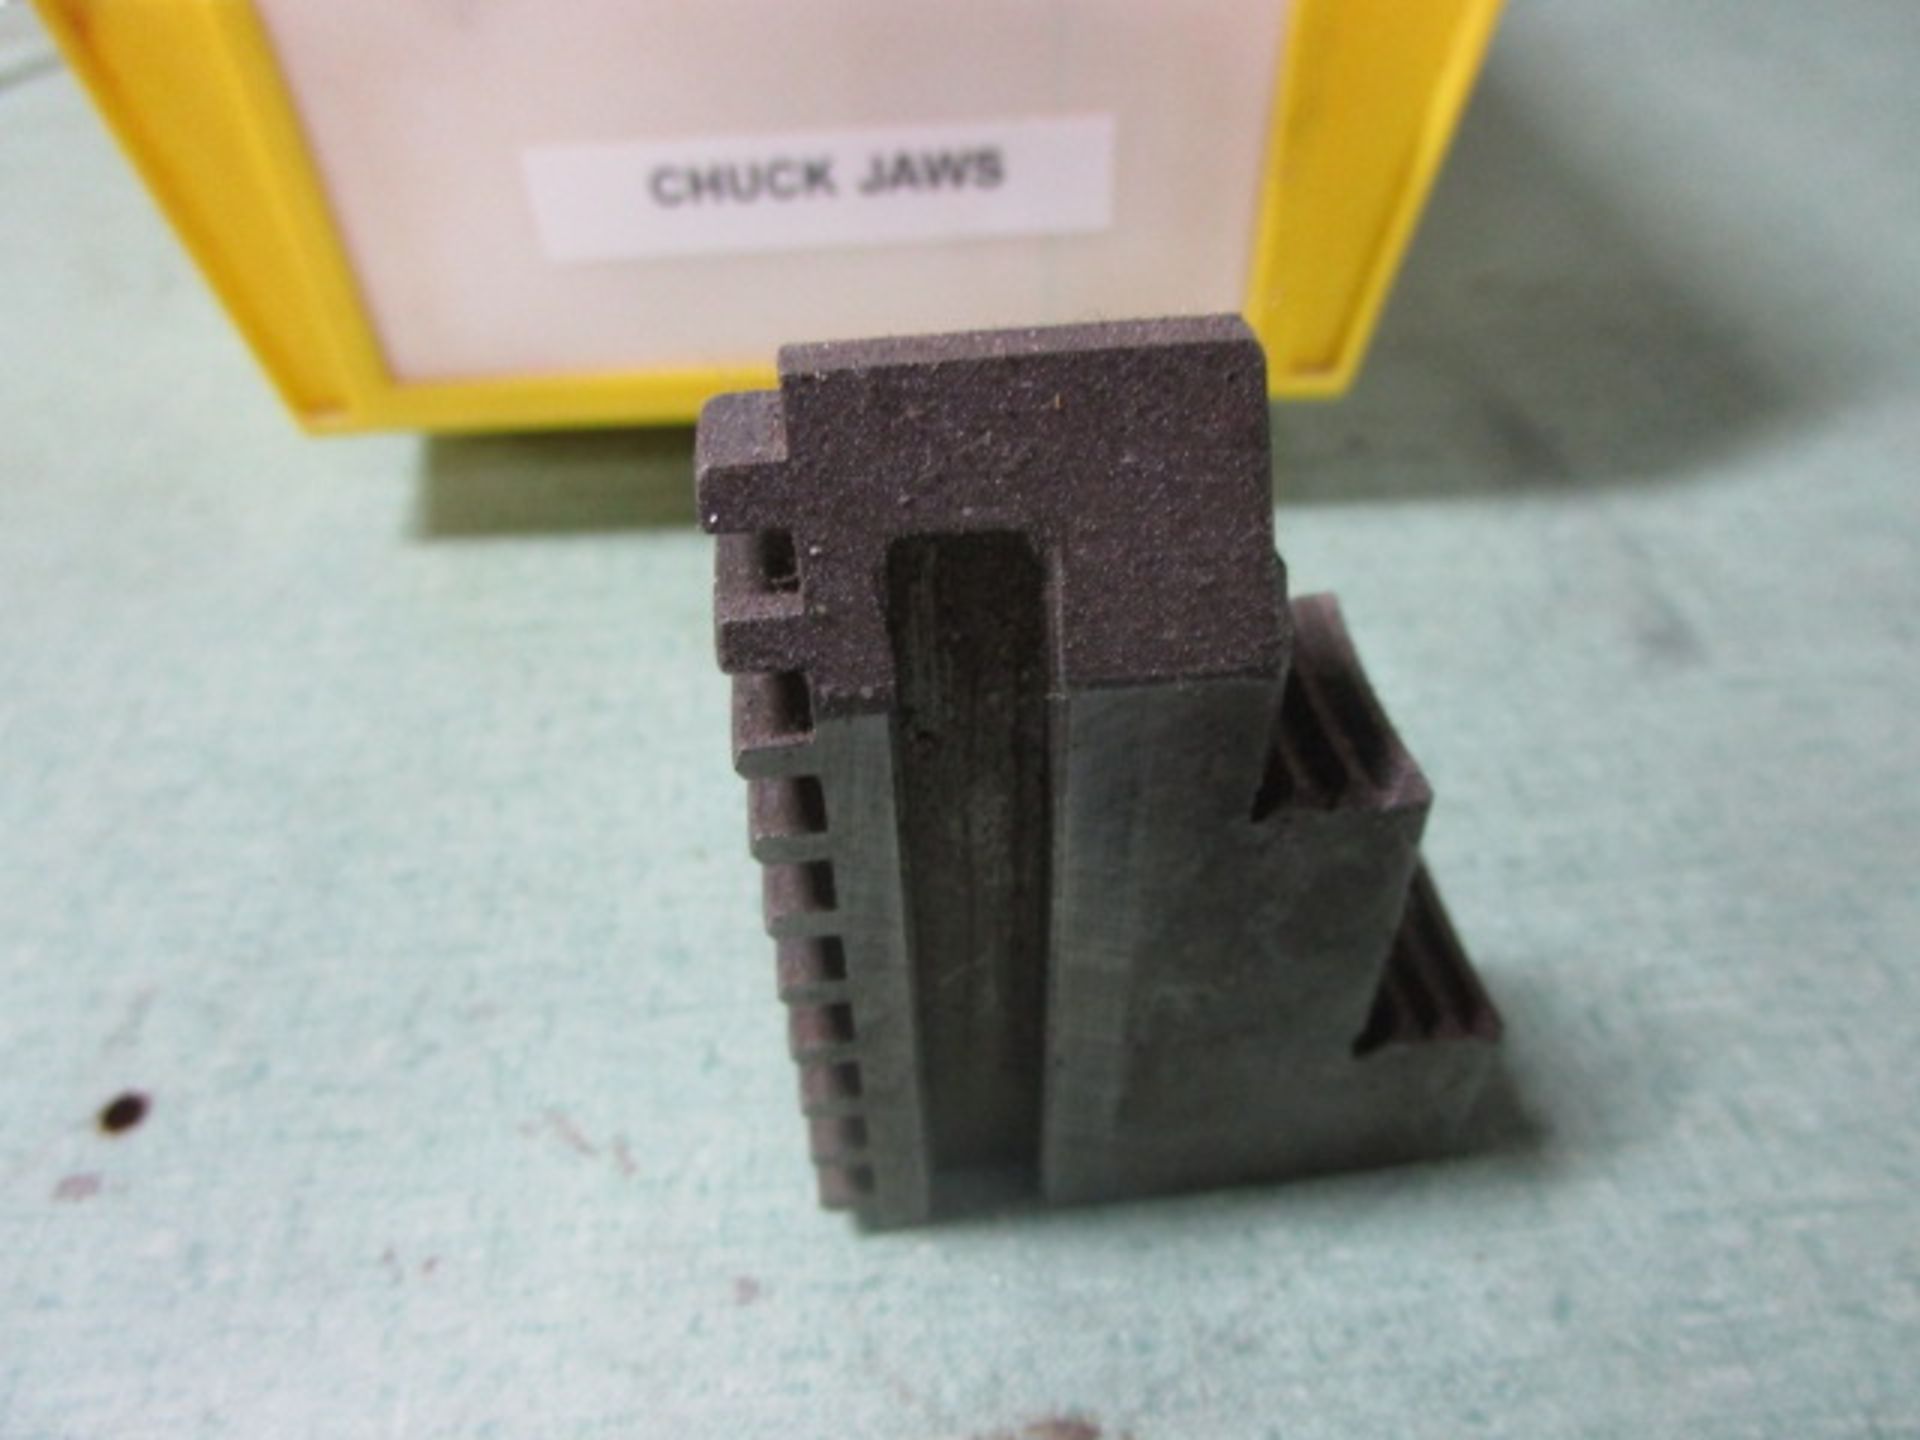 TOOLING PARTS, CHUCK JAWS - CONCORD - Image 3 of 5